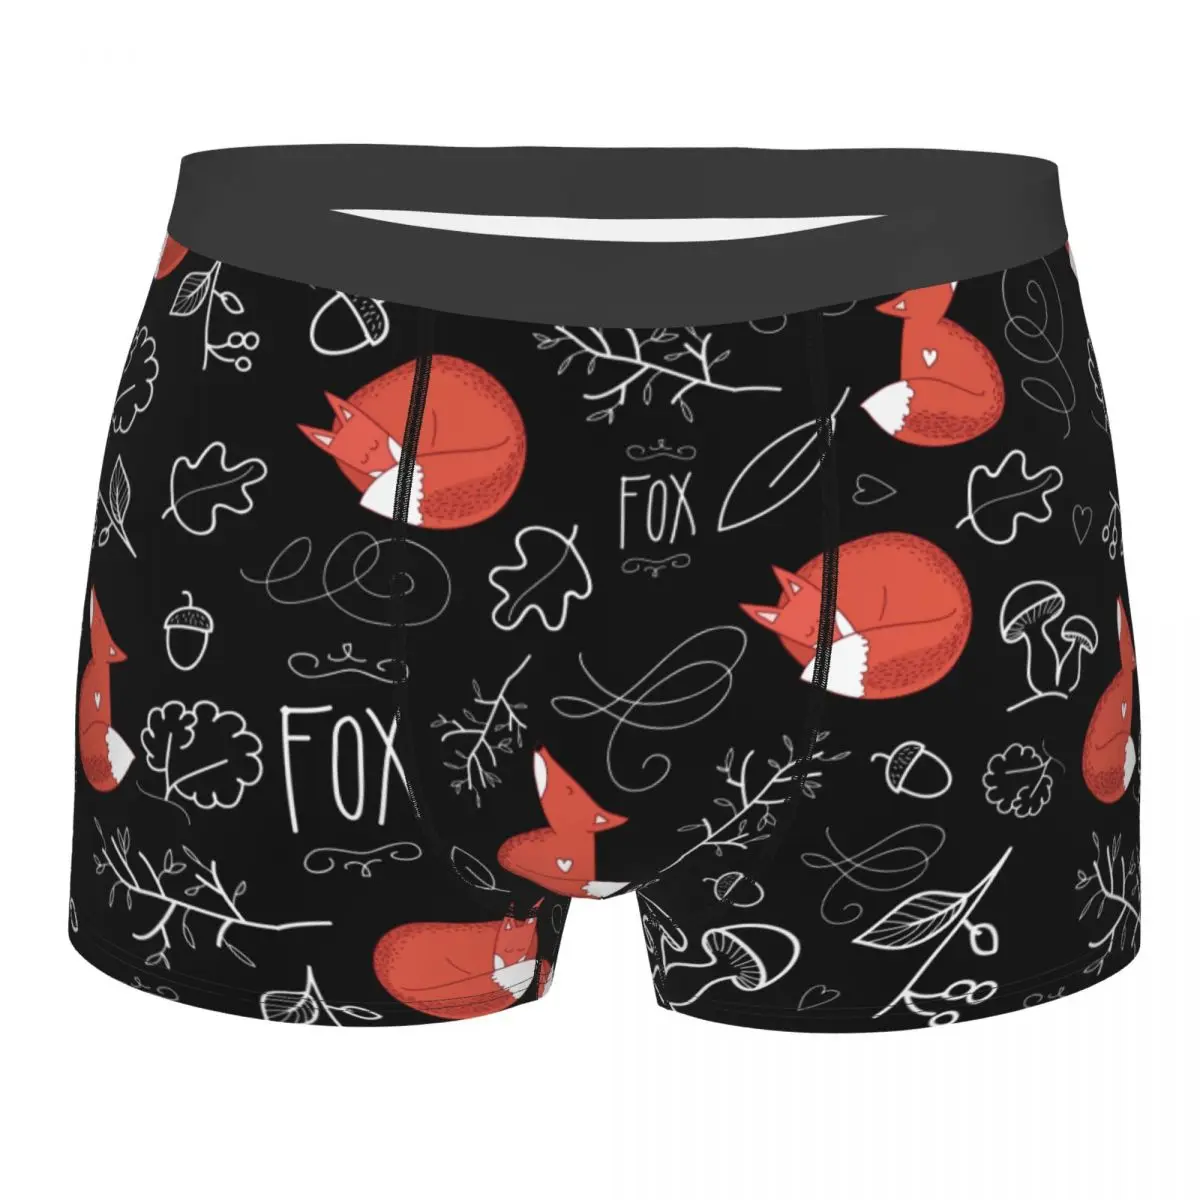 Men's Forest Animal Loving Fox Boxer Shorts Panties Breathable Underwear Homme Funny Underpants